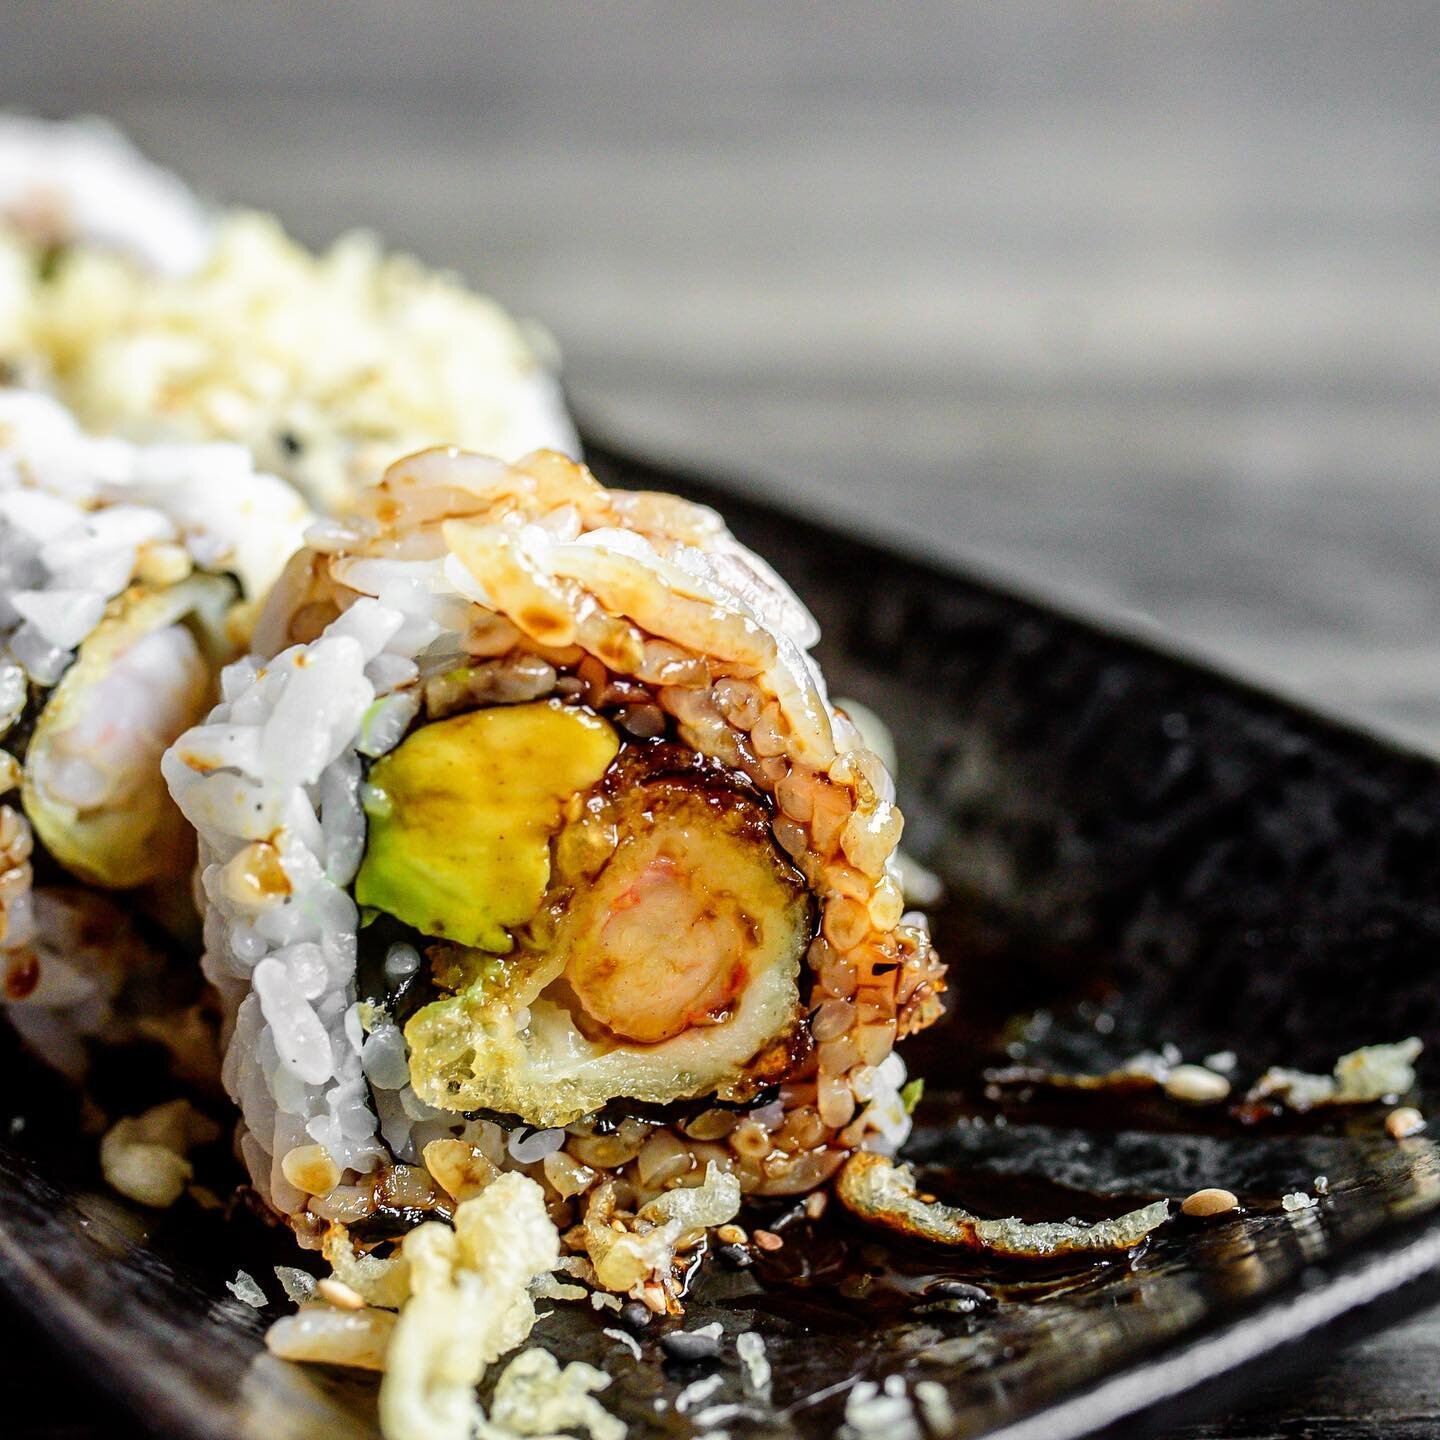 A closer look at our crunch shrimp roll - available for dine-in, pickup and delivery starting at 11:30!  Tag a friend who&rsquo;d love to try this roll 🍣